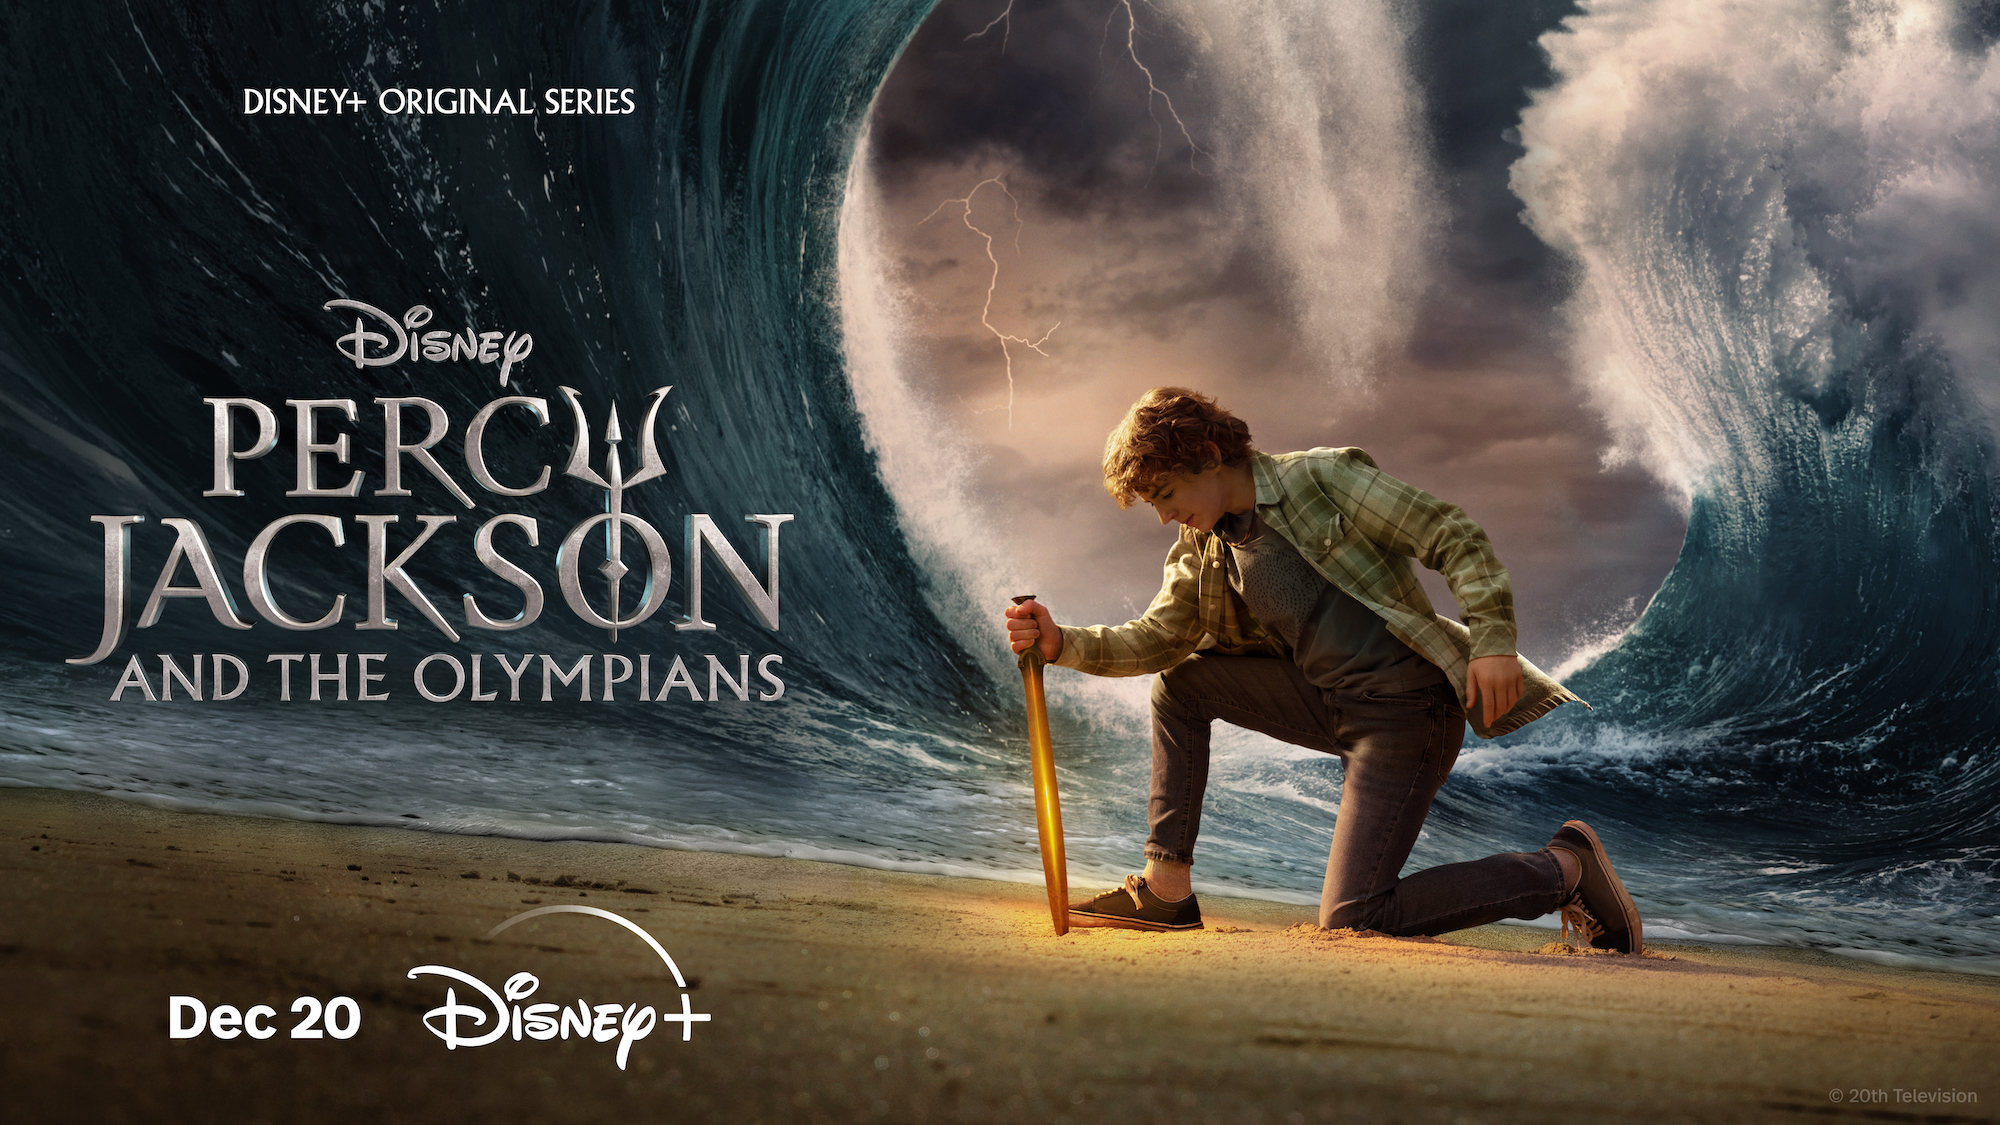 Disney+ Unveils Trailer For Percy Jackson And The Olympians Series